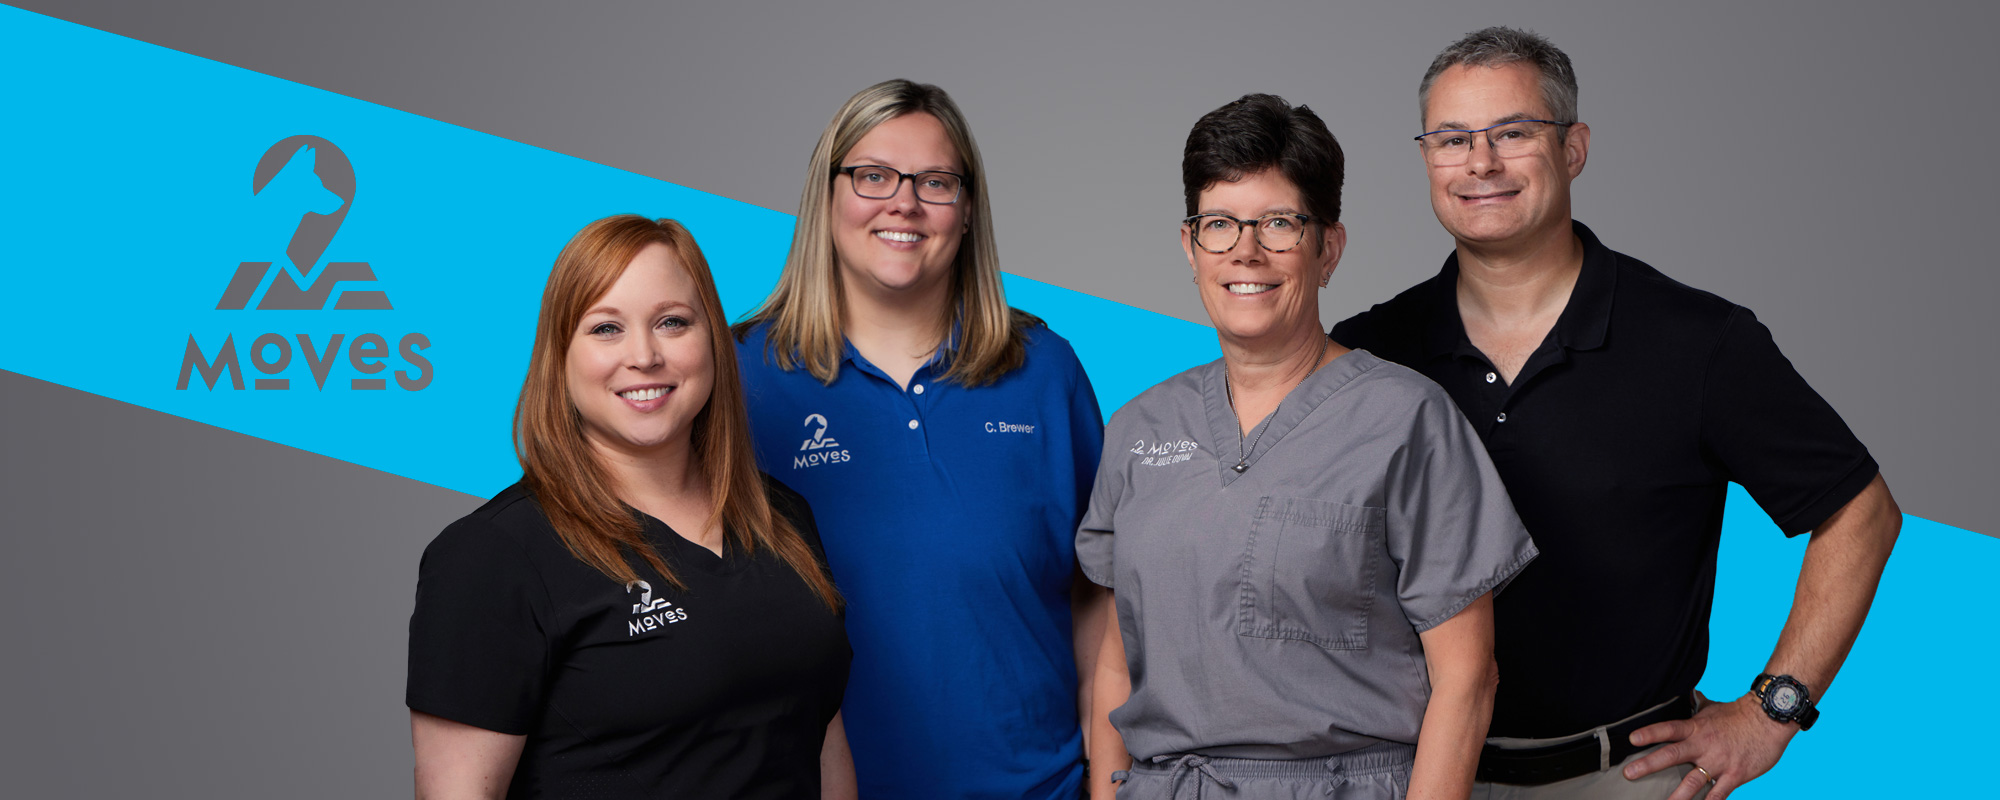 Group Portrait of the MOVES Atlanta team including Derek and Julie Duval and their veterinary technicians.